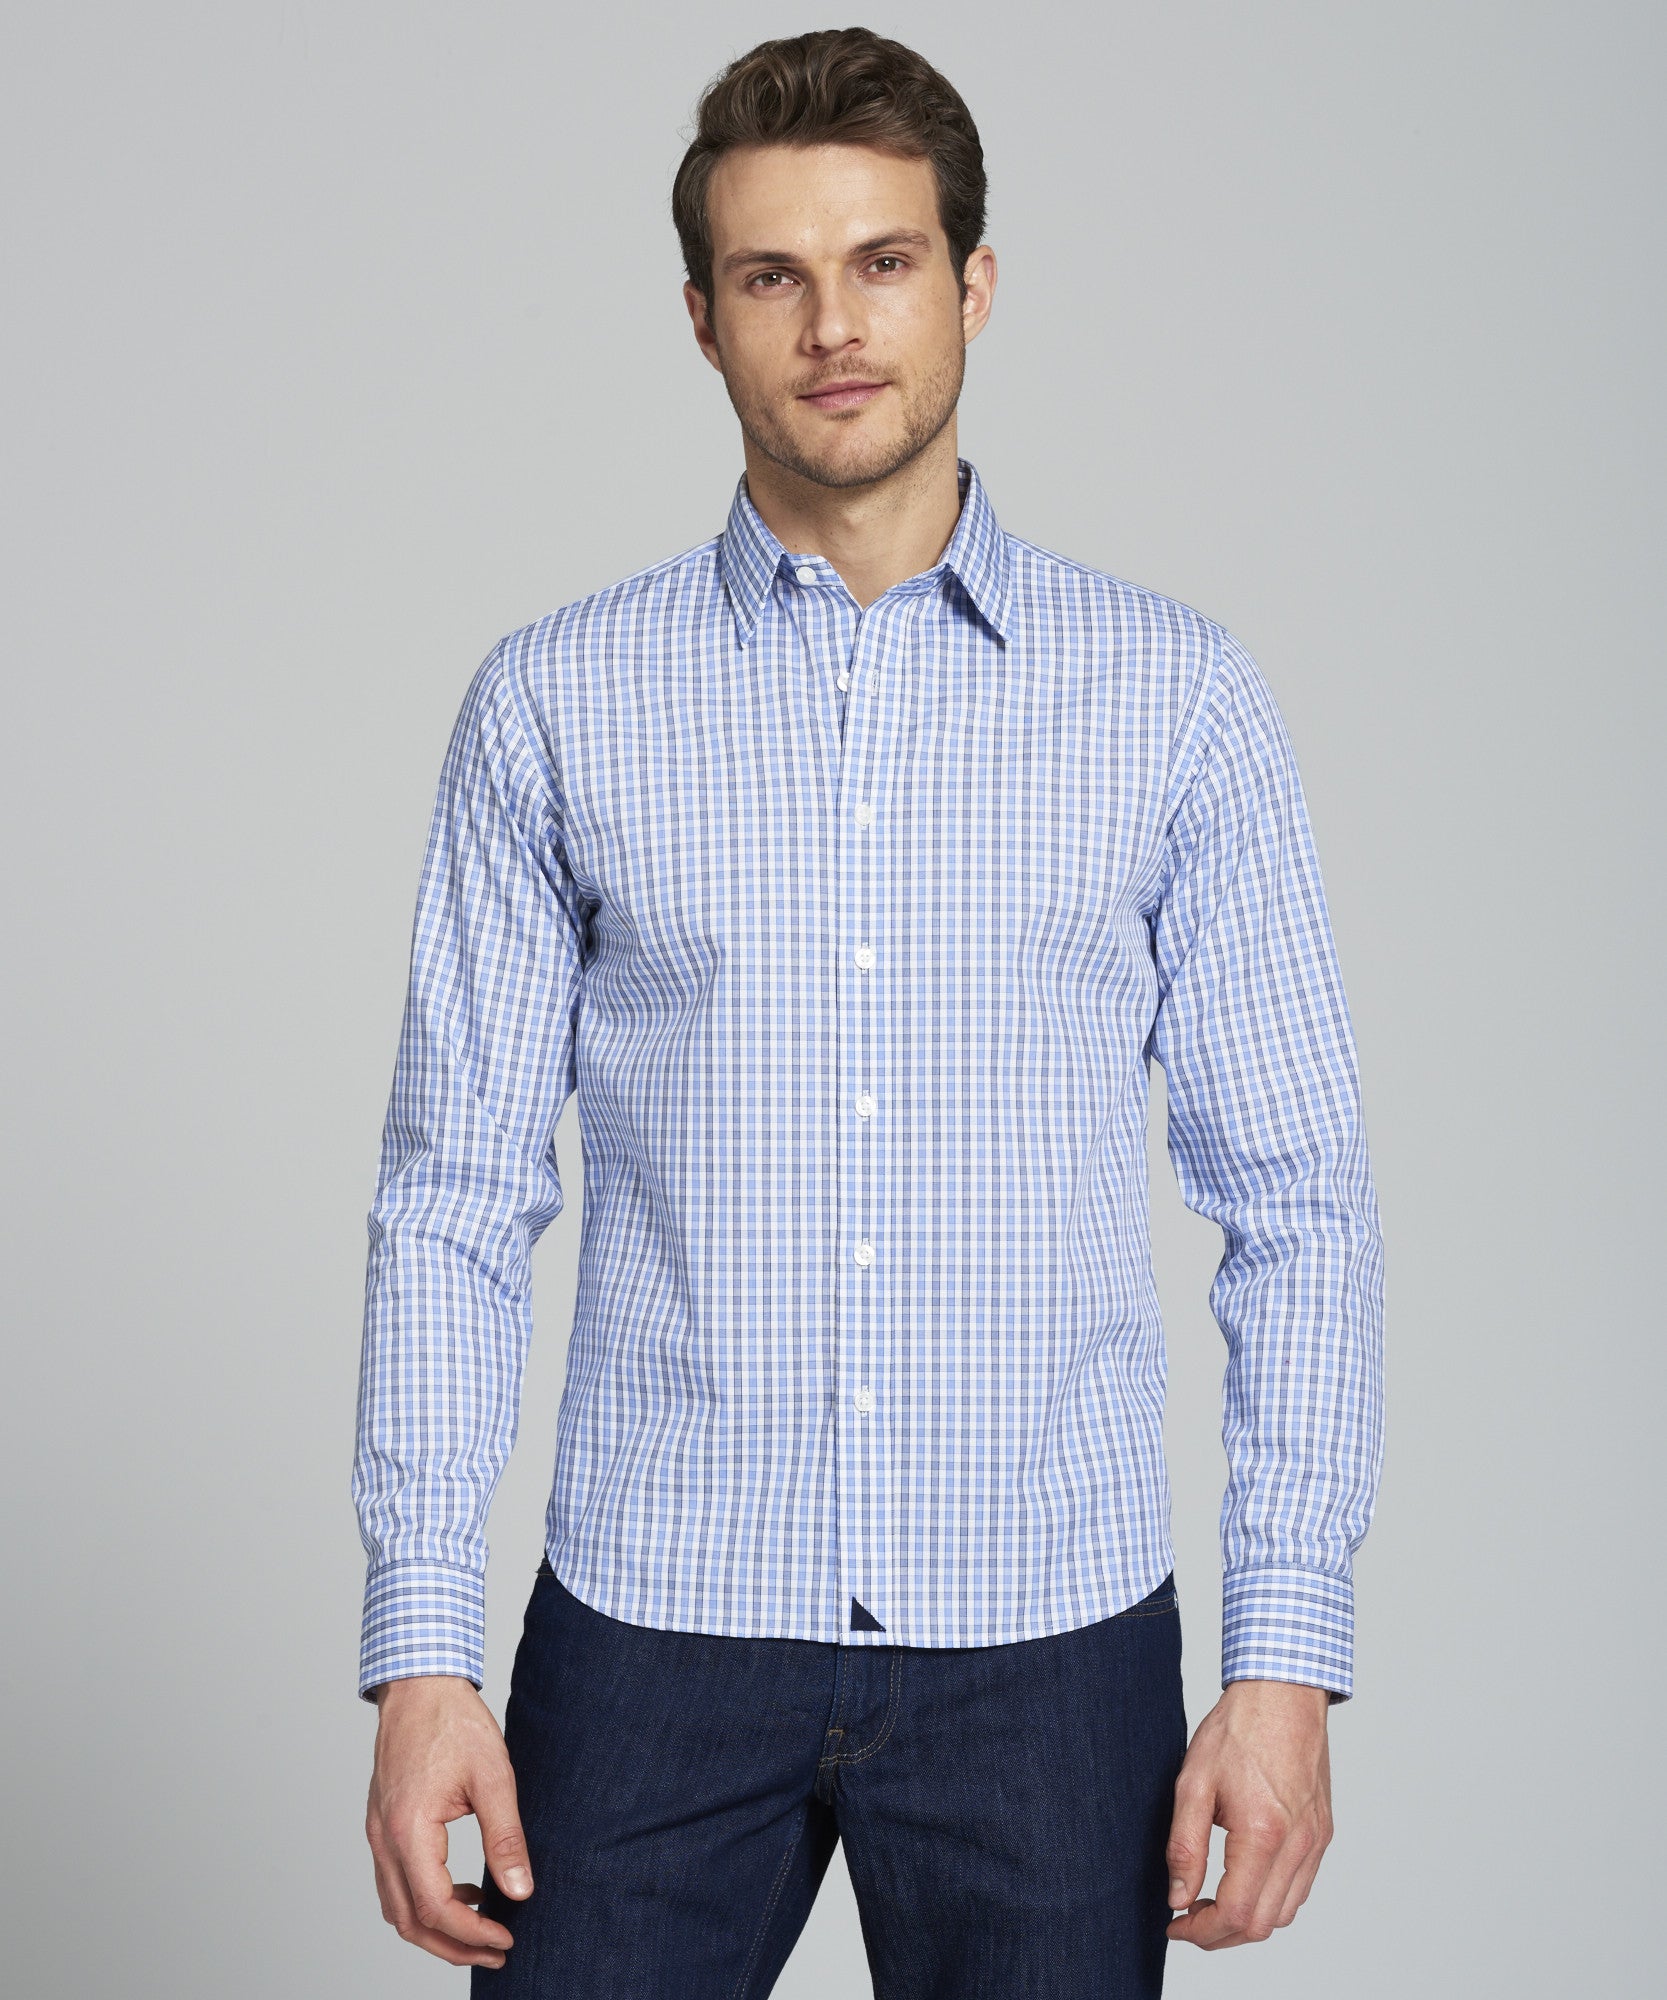 Durif - Button-down Designed to be Worn Untucked | UNTUCKit